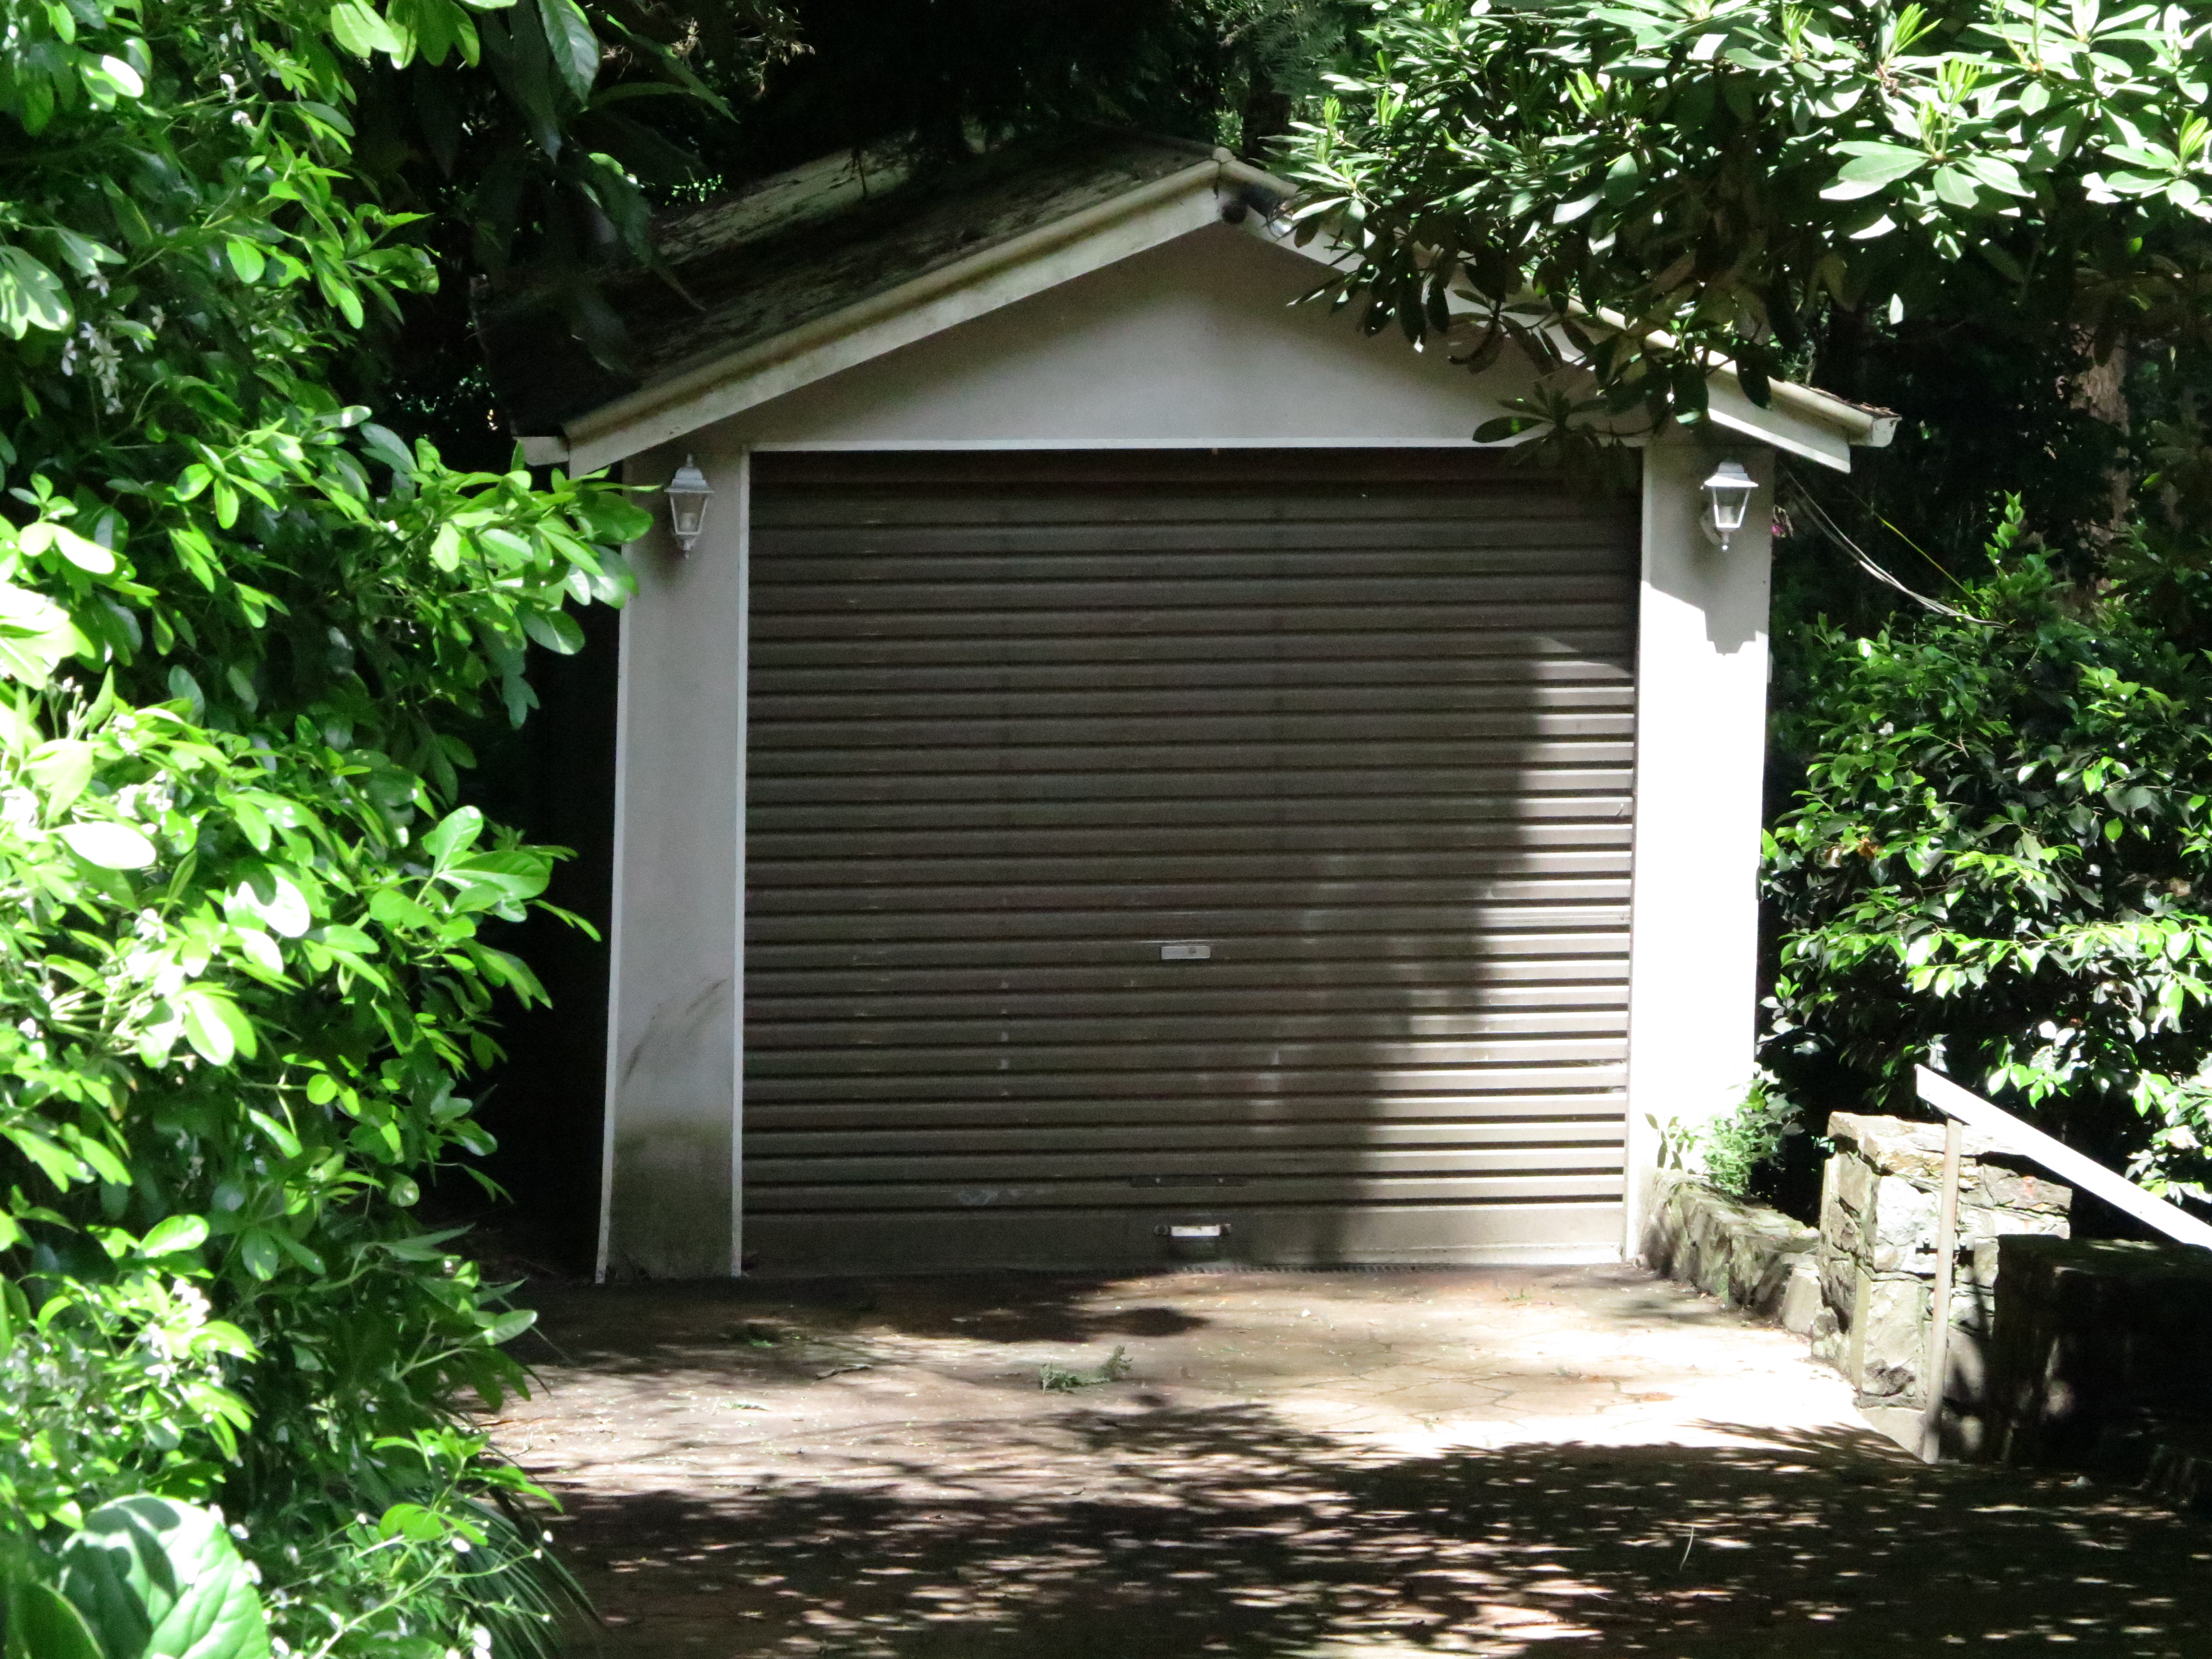 Controlling your garage door or gate from your smartphone